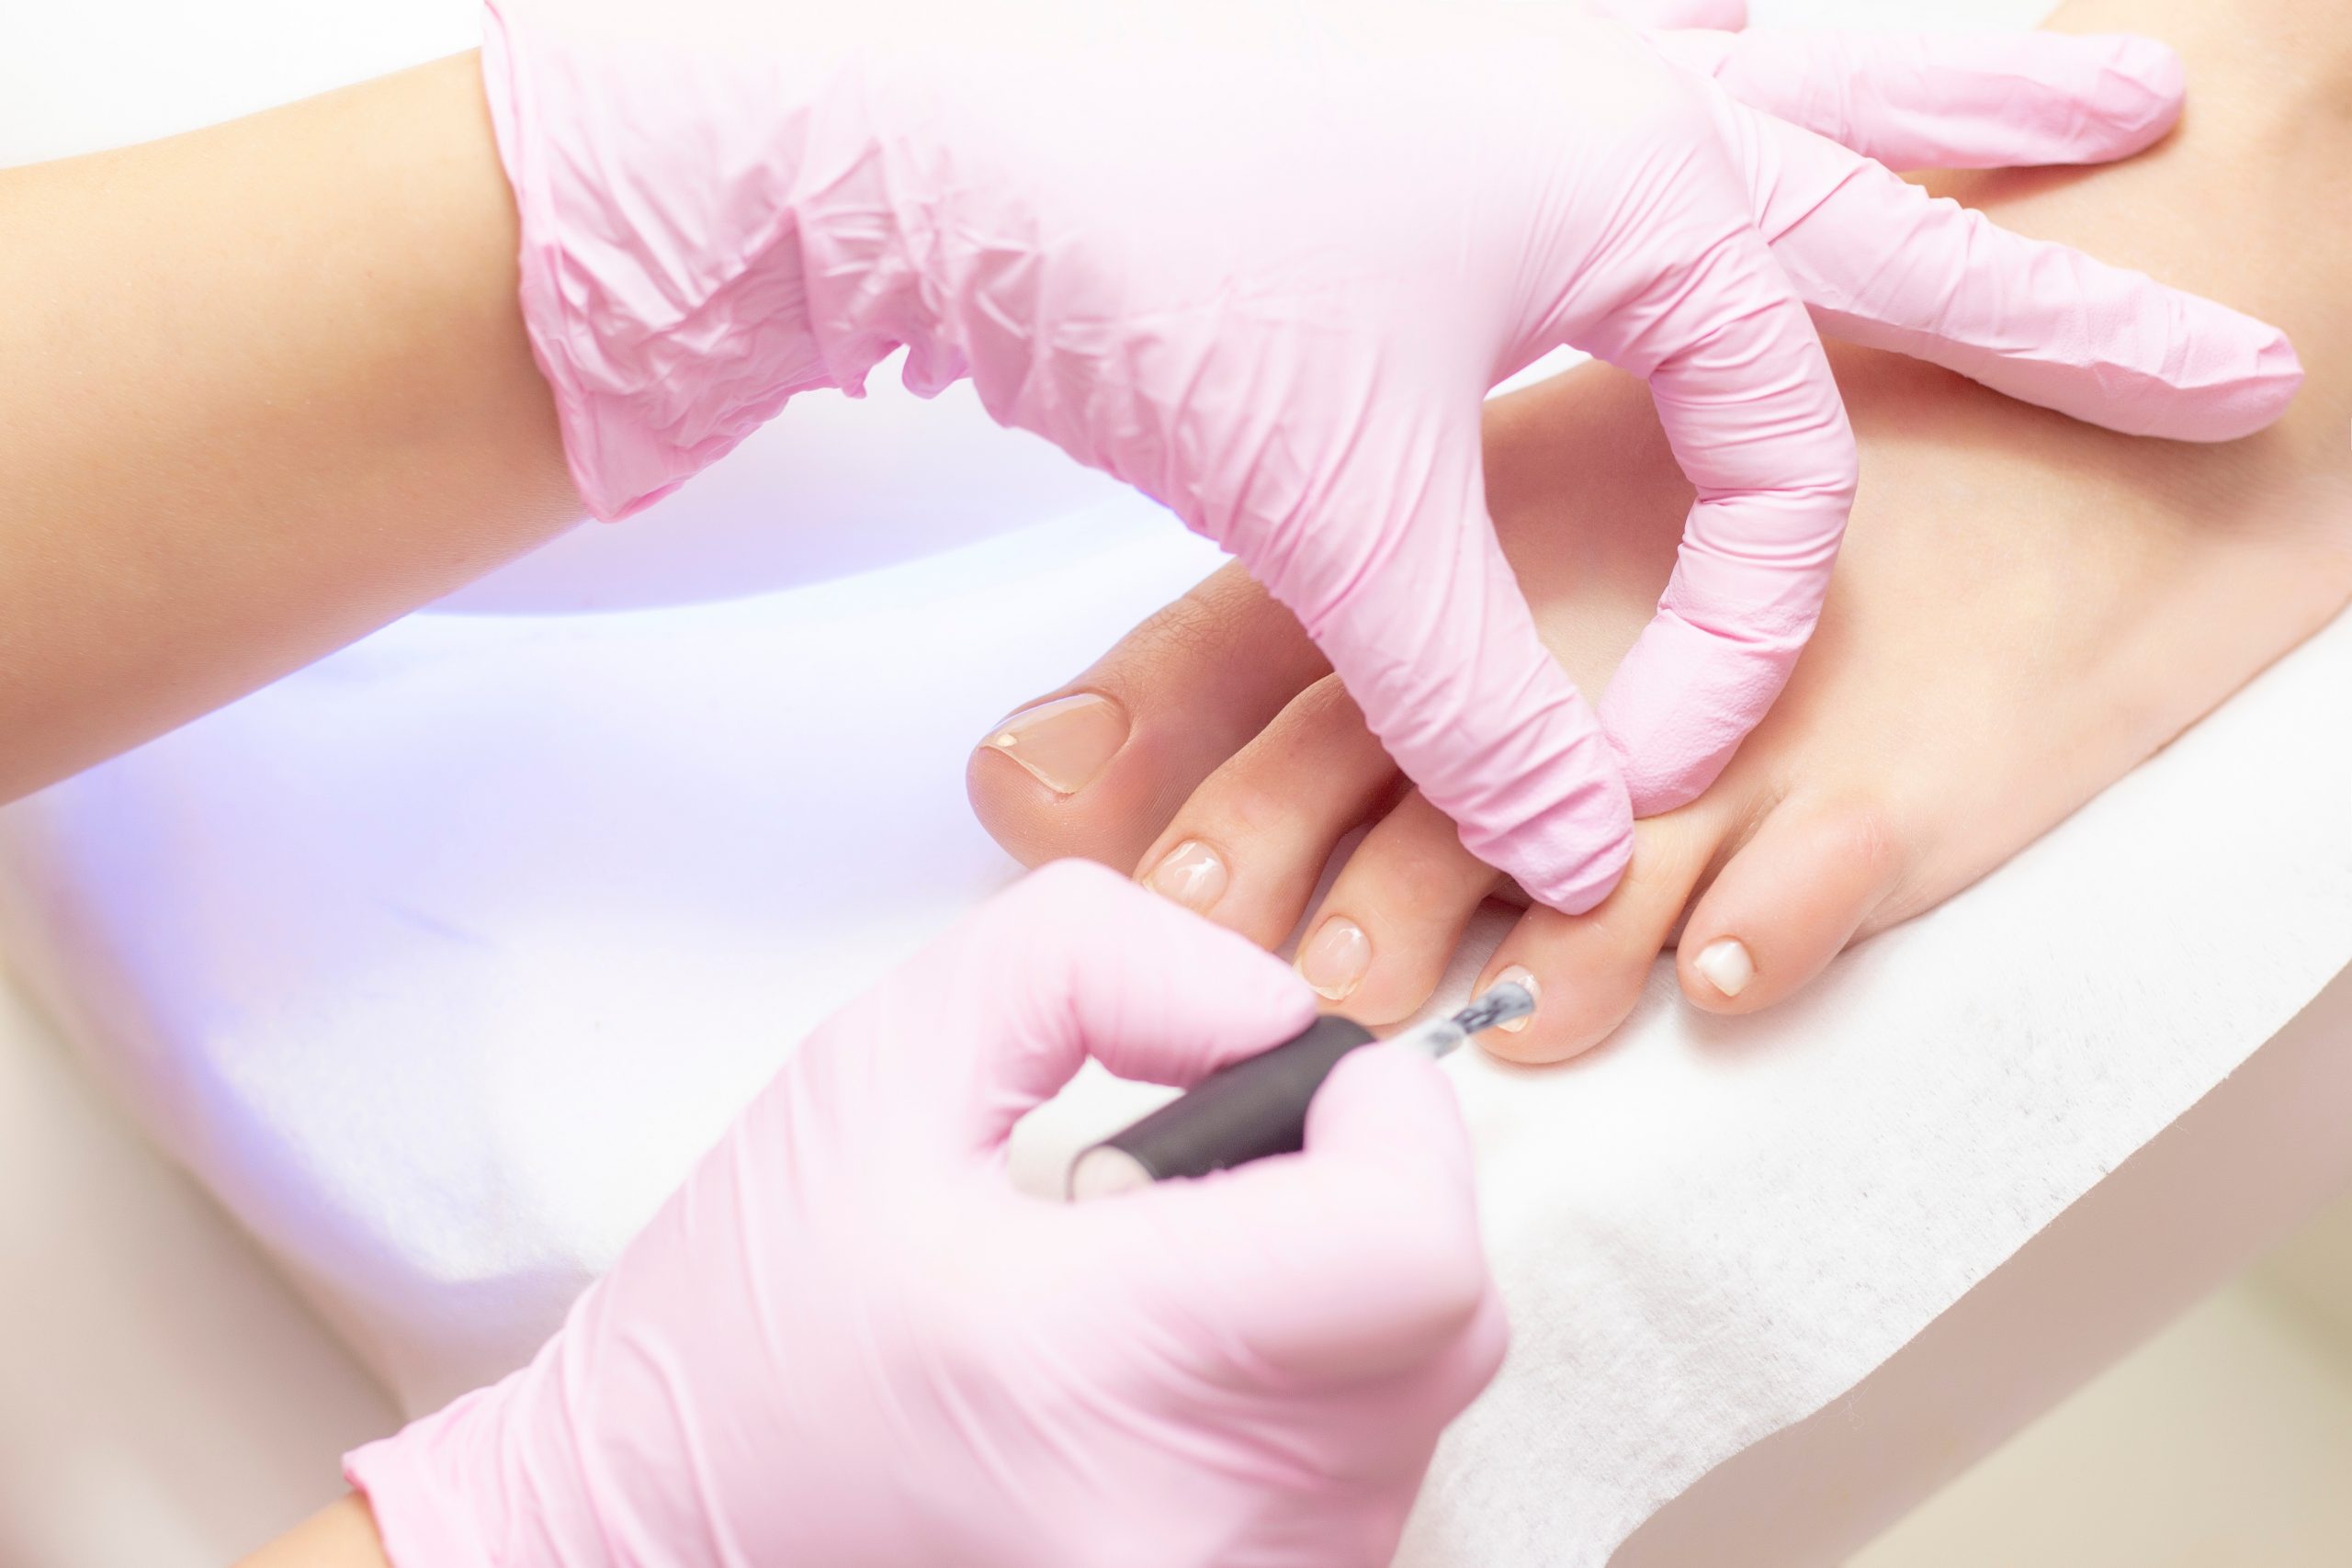 Topical Treatment For Fungal Nails